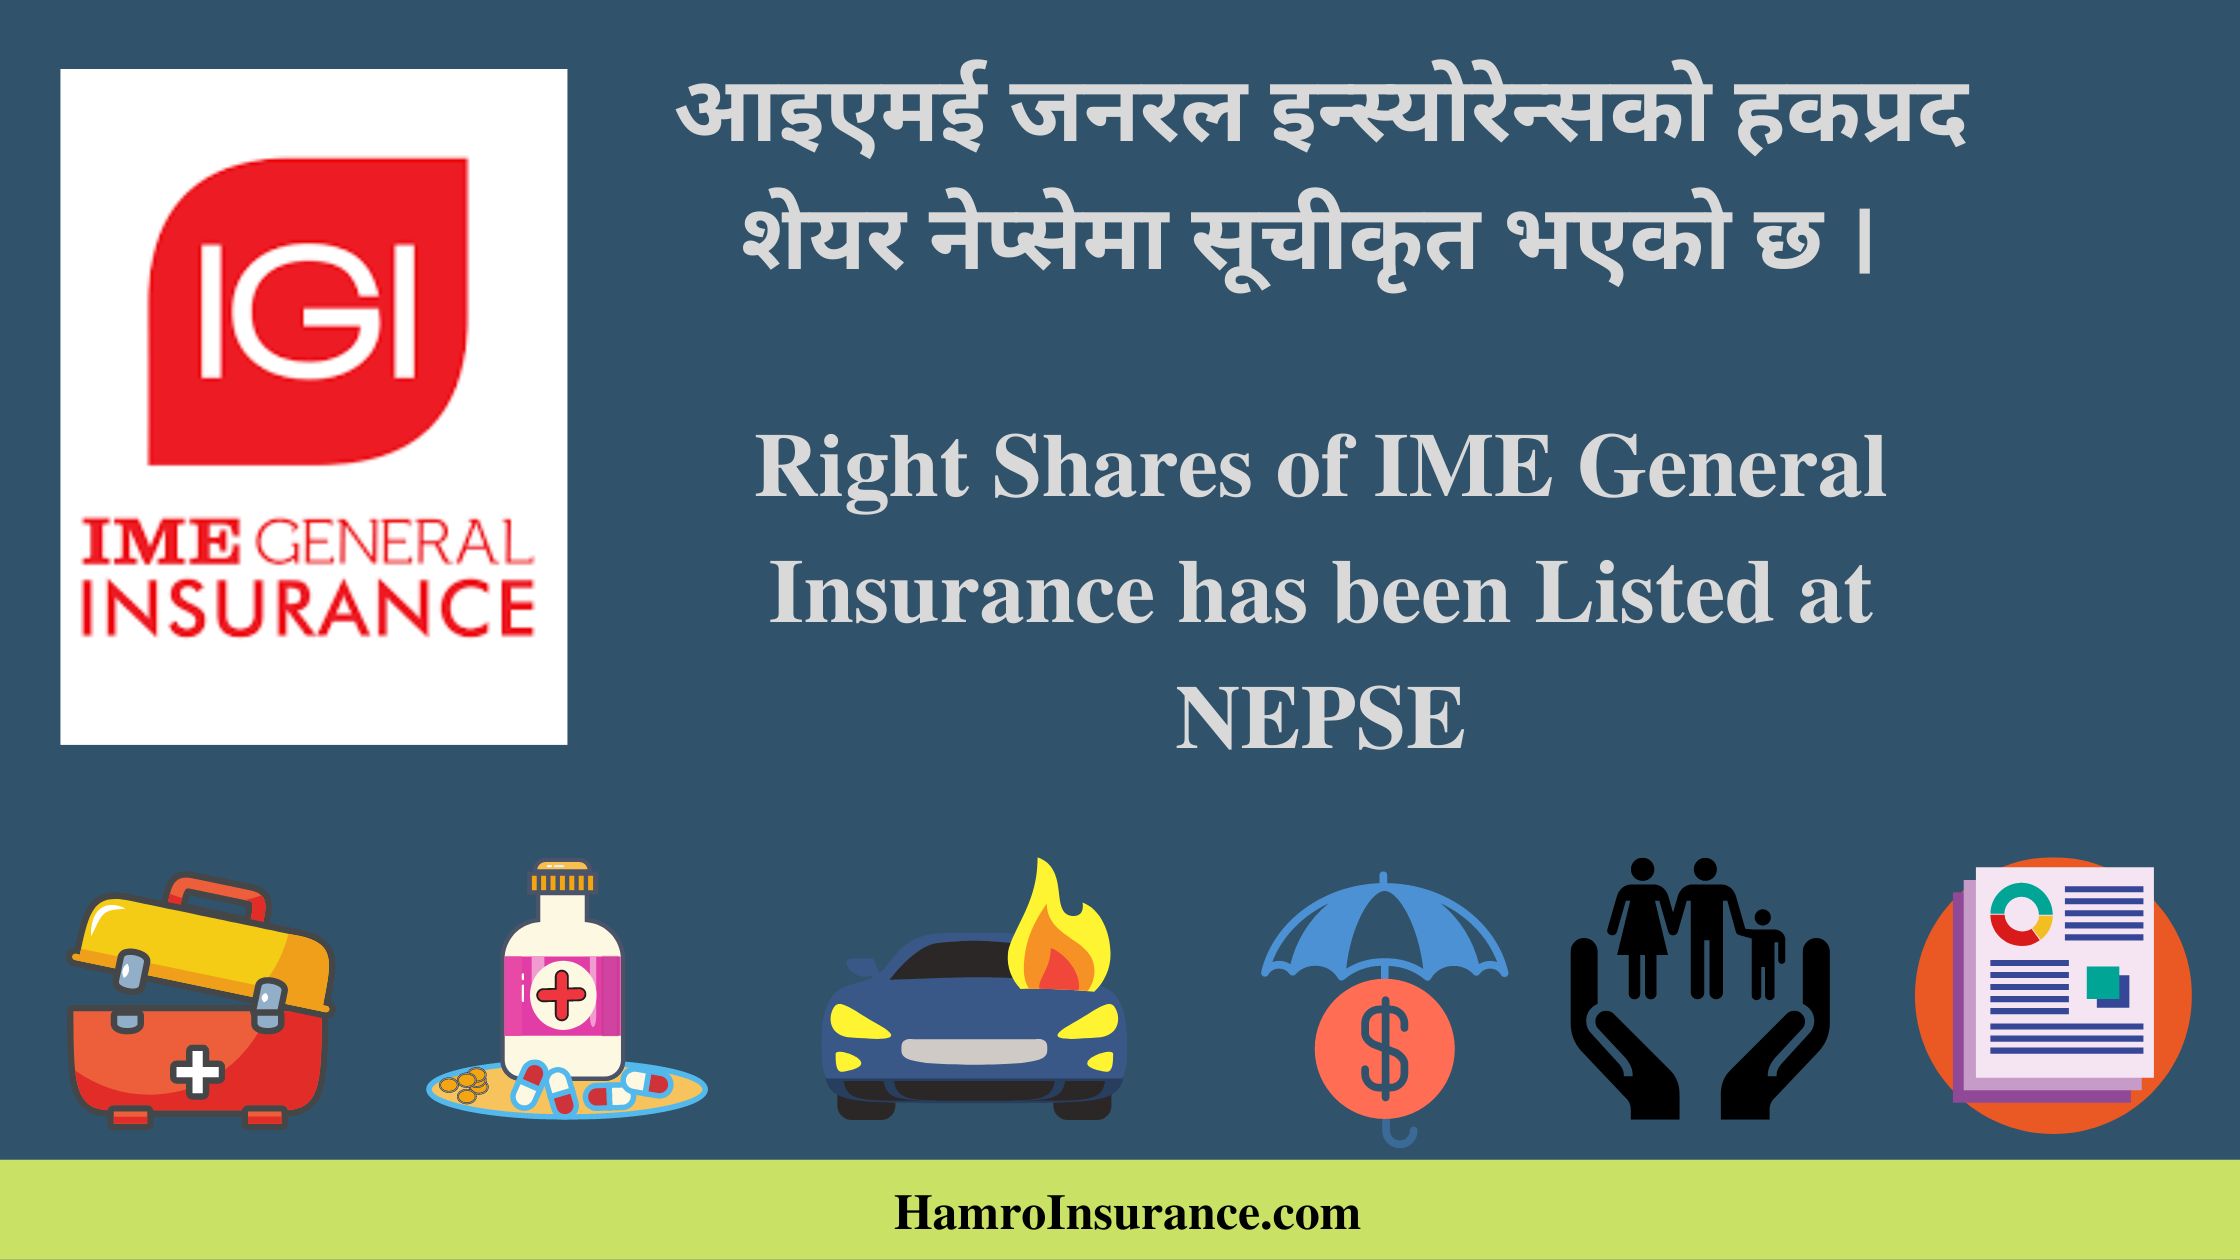 Right Shares of IME General Insurance has been Listed at NEPSE